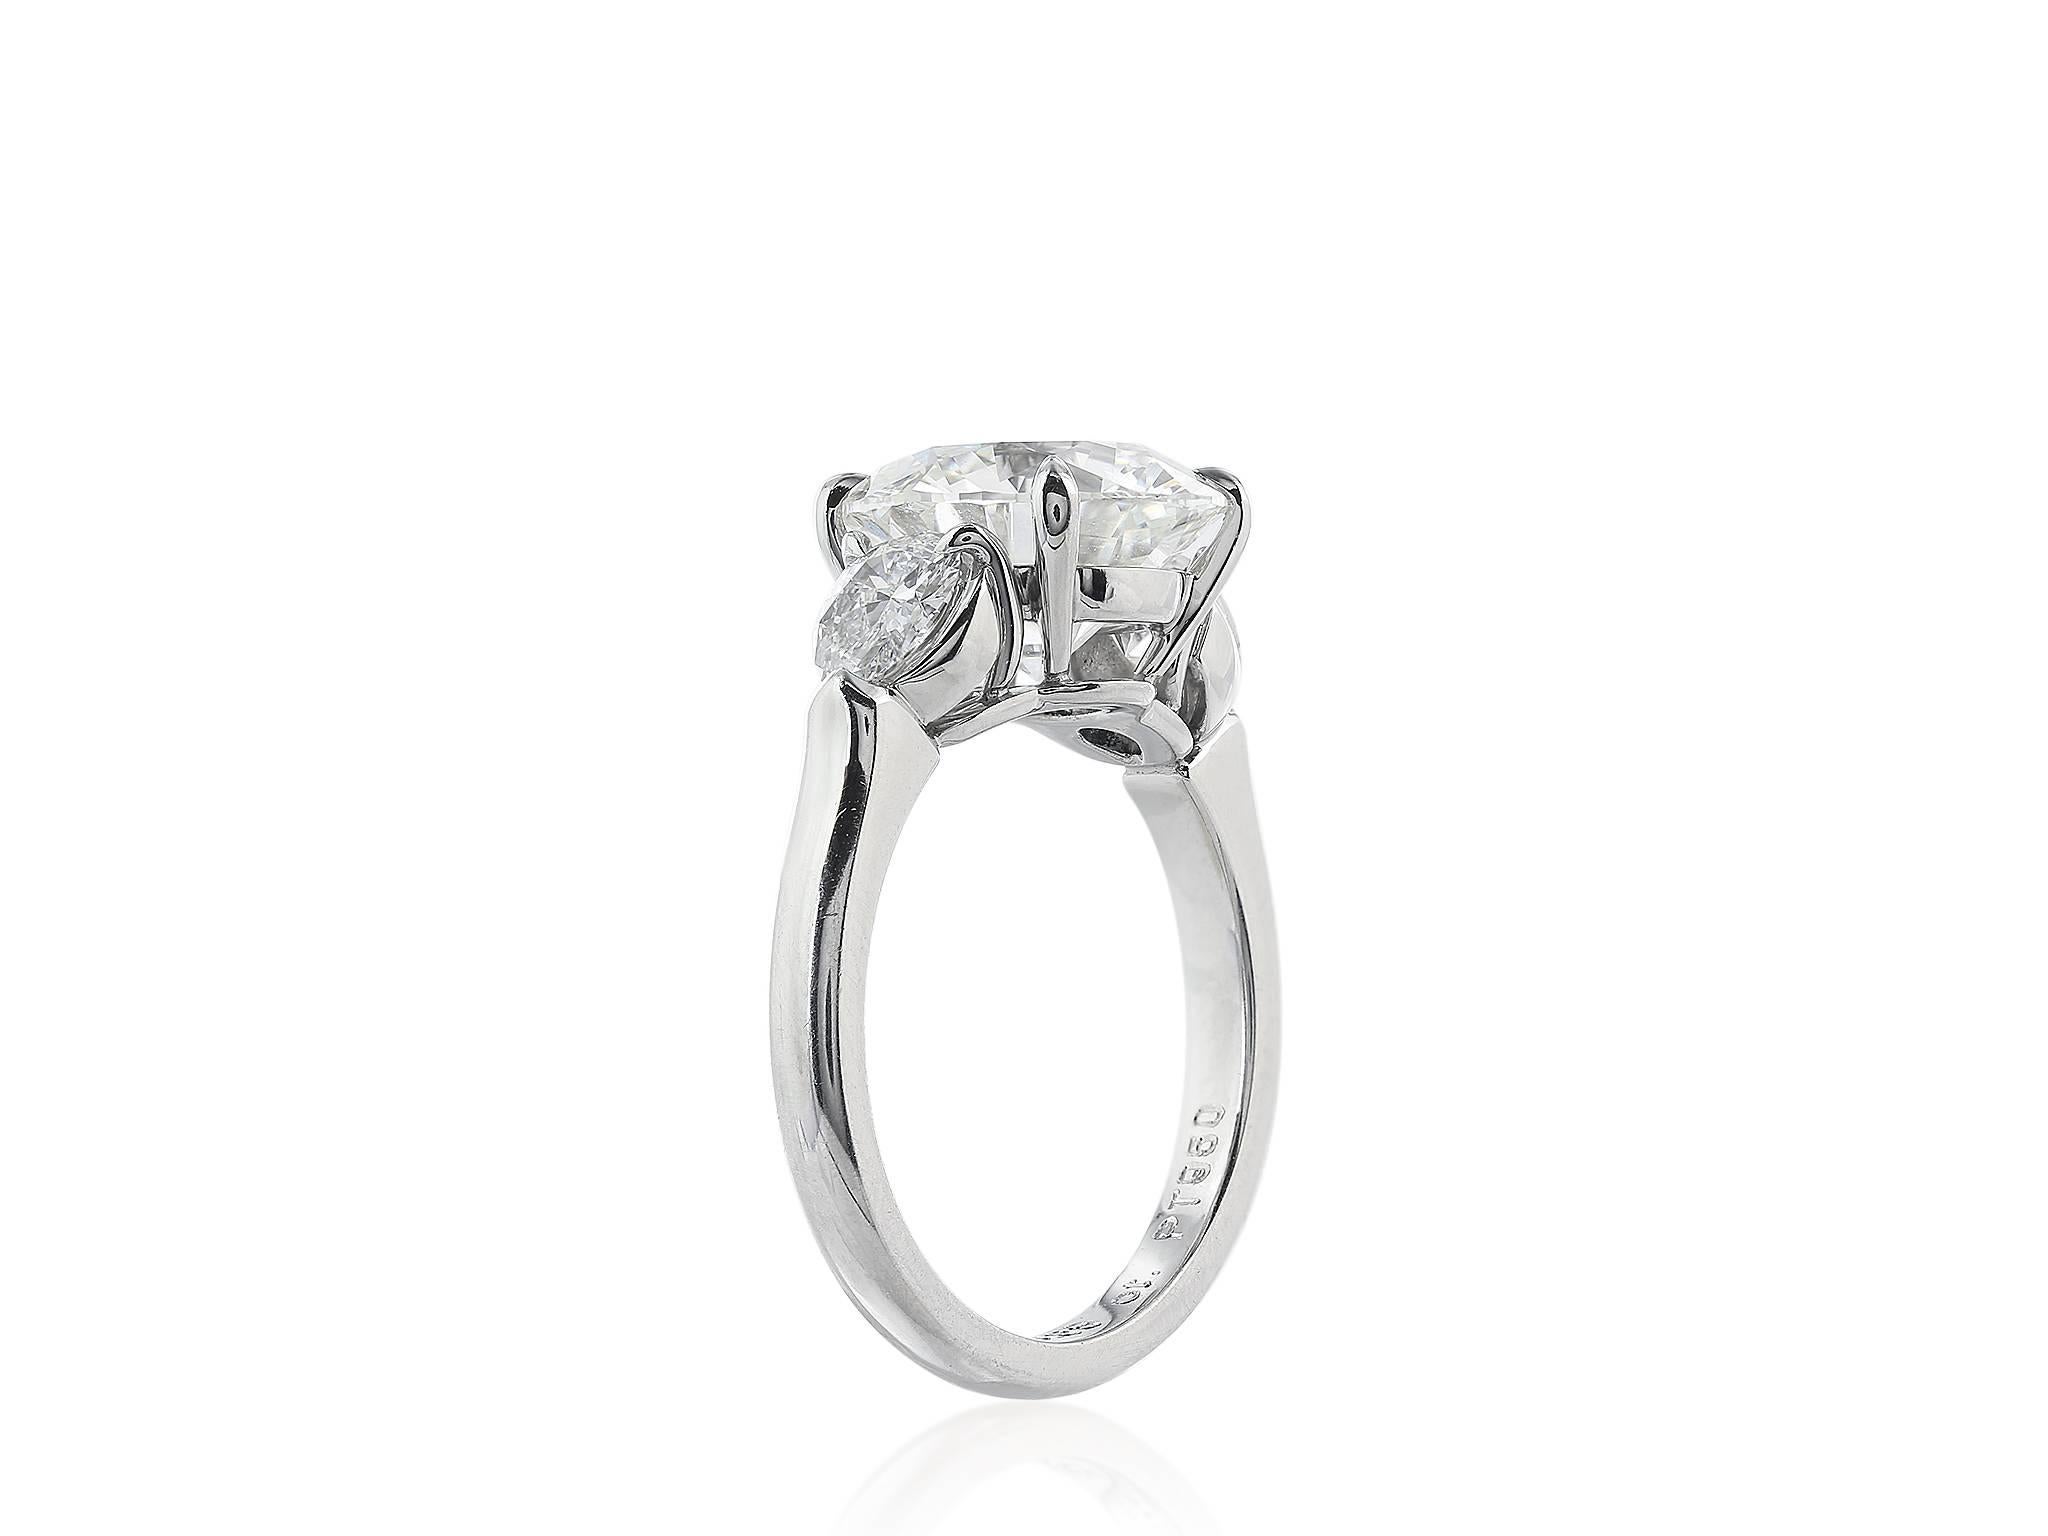 Platinum custom made 3 stone ring consisting of 1 round brilliant cut diamond weighing 3.61 carats, having a color and clarity of J SI1, measuring 9.84X9.86X6.07mm, with GIA certificate #5171354005, the diamond is flanked by 2 round brilliant cut